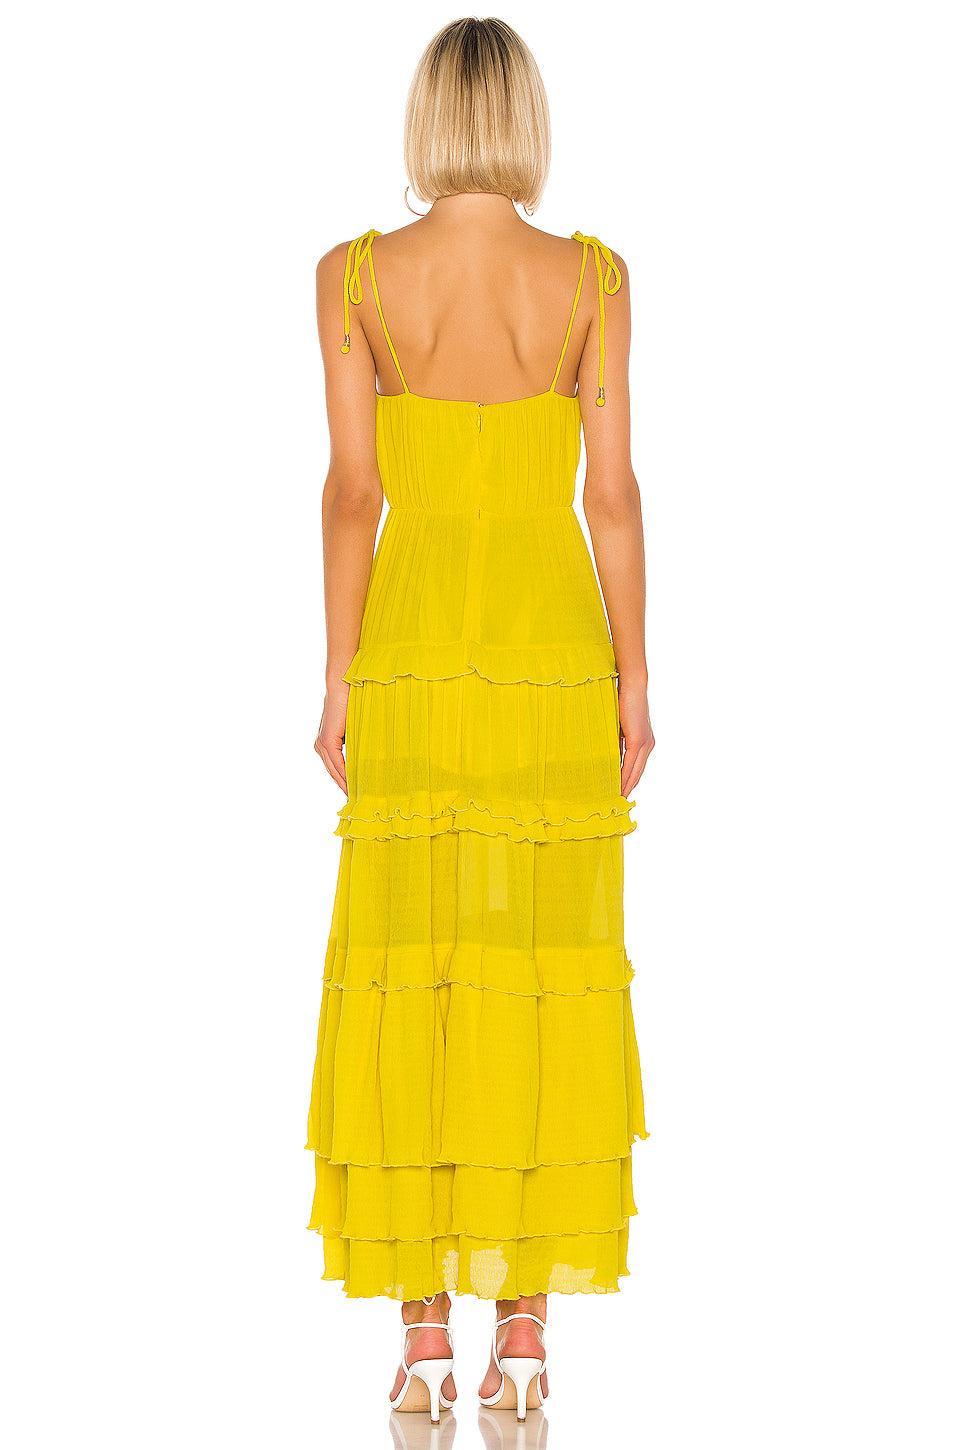 Tinsley Dress in VIBRANT YELLOW